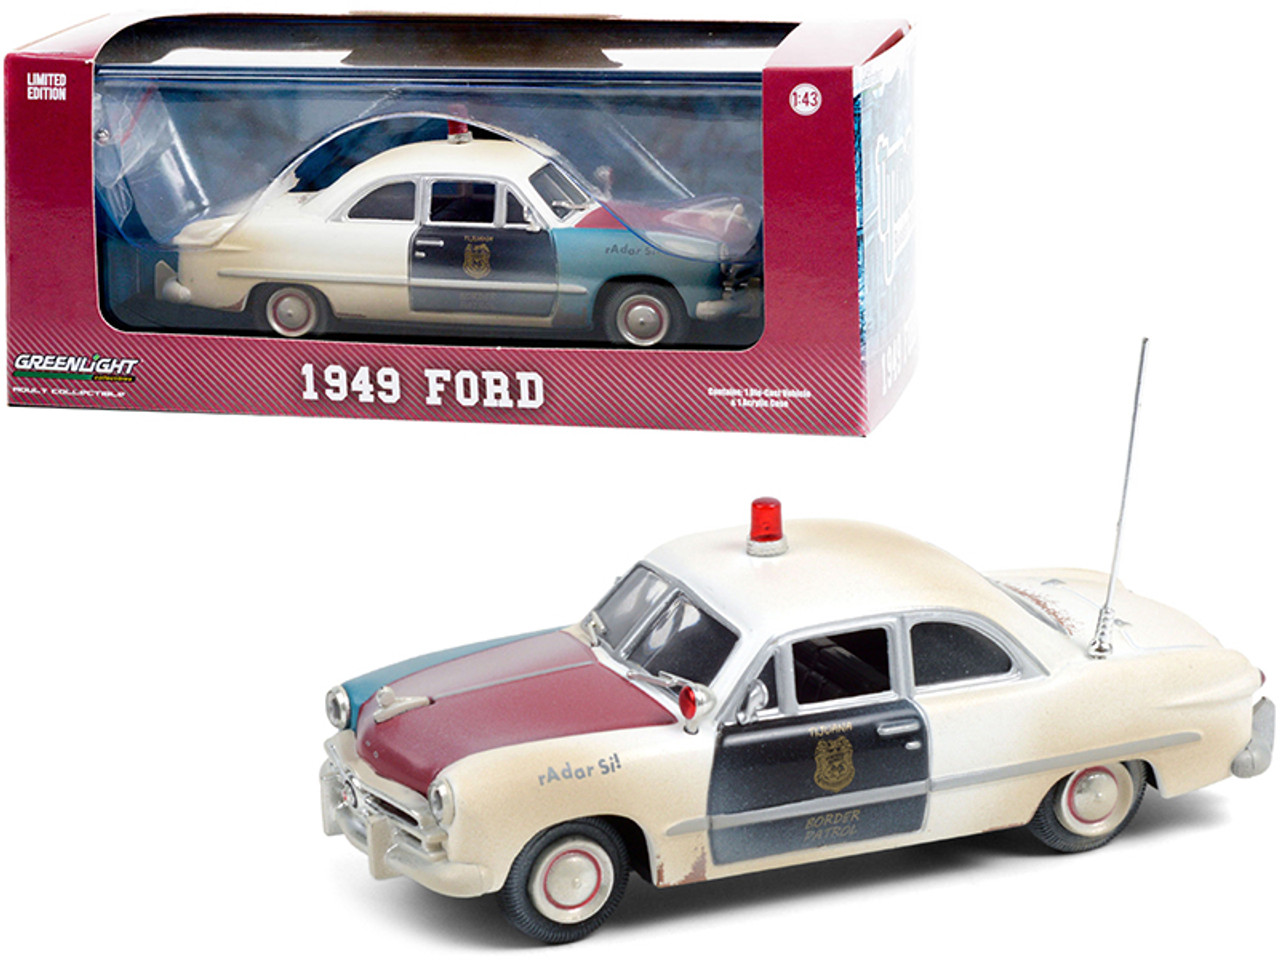 1949 Ford Police Car (Weathered Version) "Tijuana Border Patrol" (Mexico) 1/43 Diecast Model Car by Greenlight